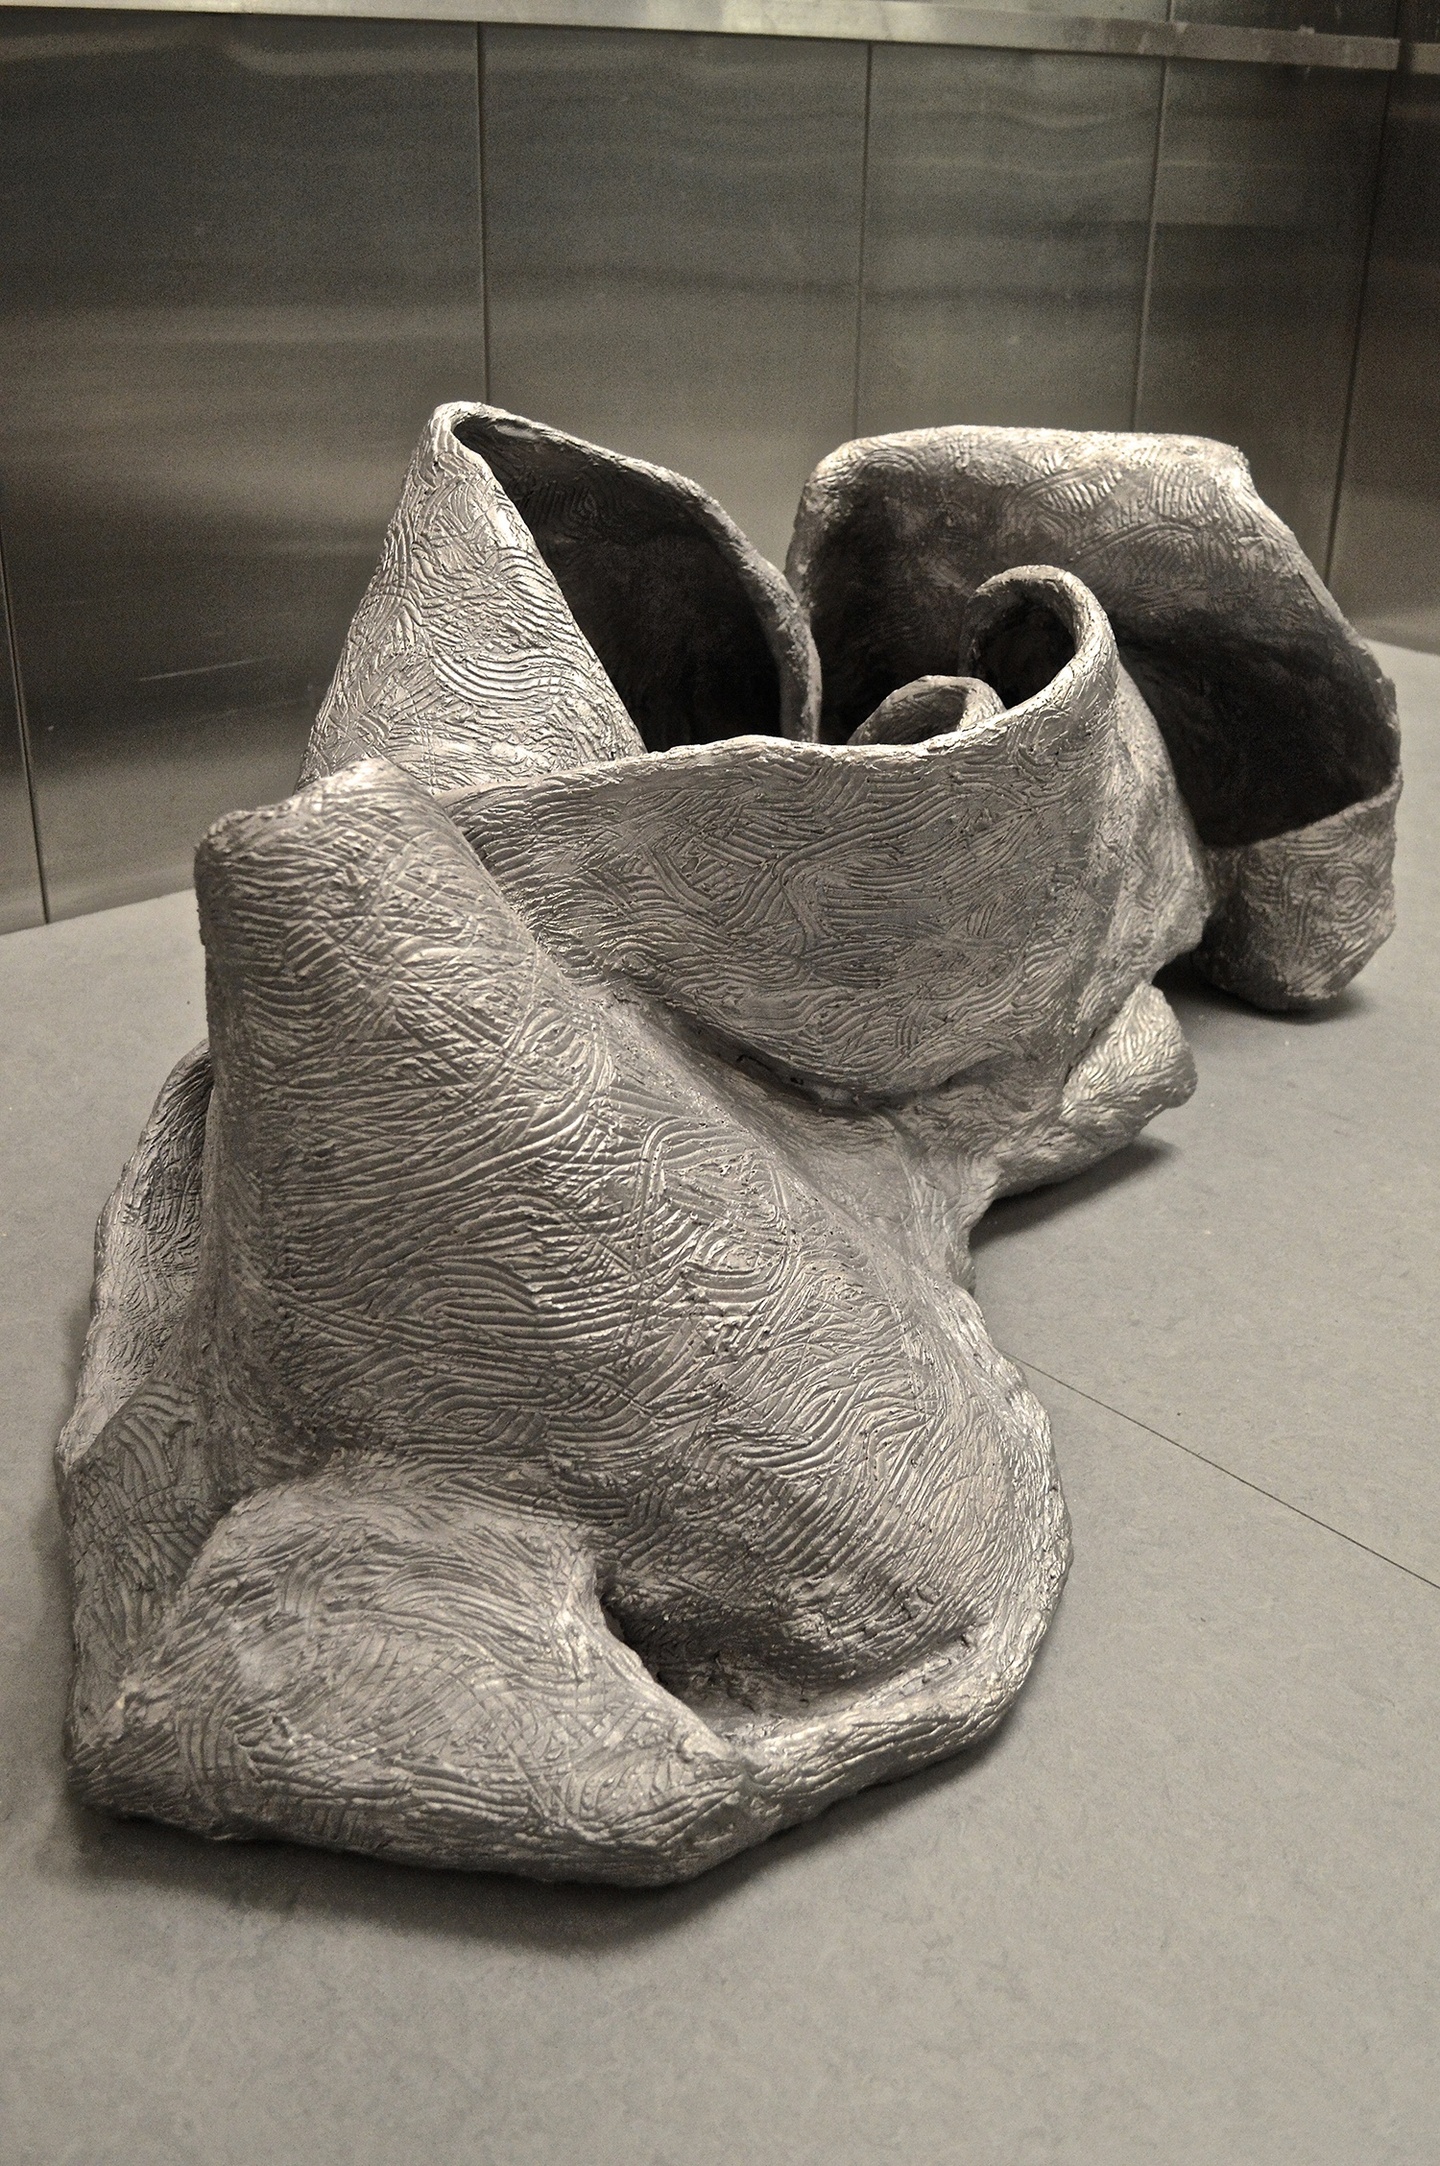 Ceramic sculpture of a long, wide sheet of clay imprinted with scratched linework that has been folded in on itself. The piece is photographed in a freight elevator.